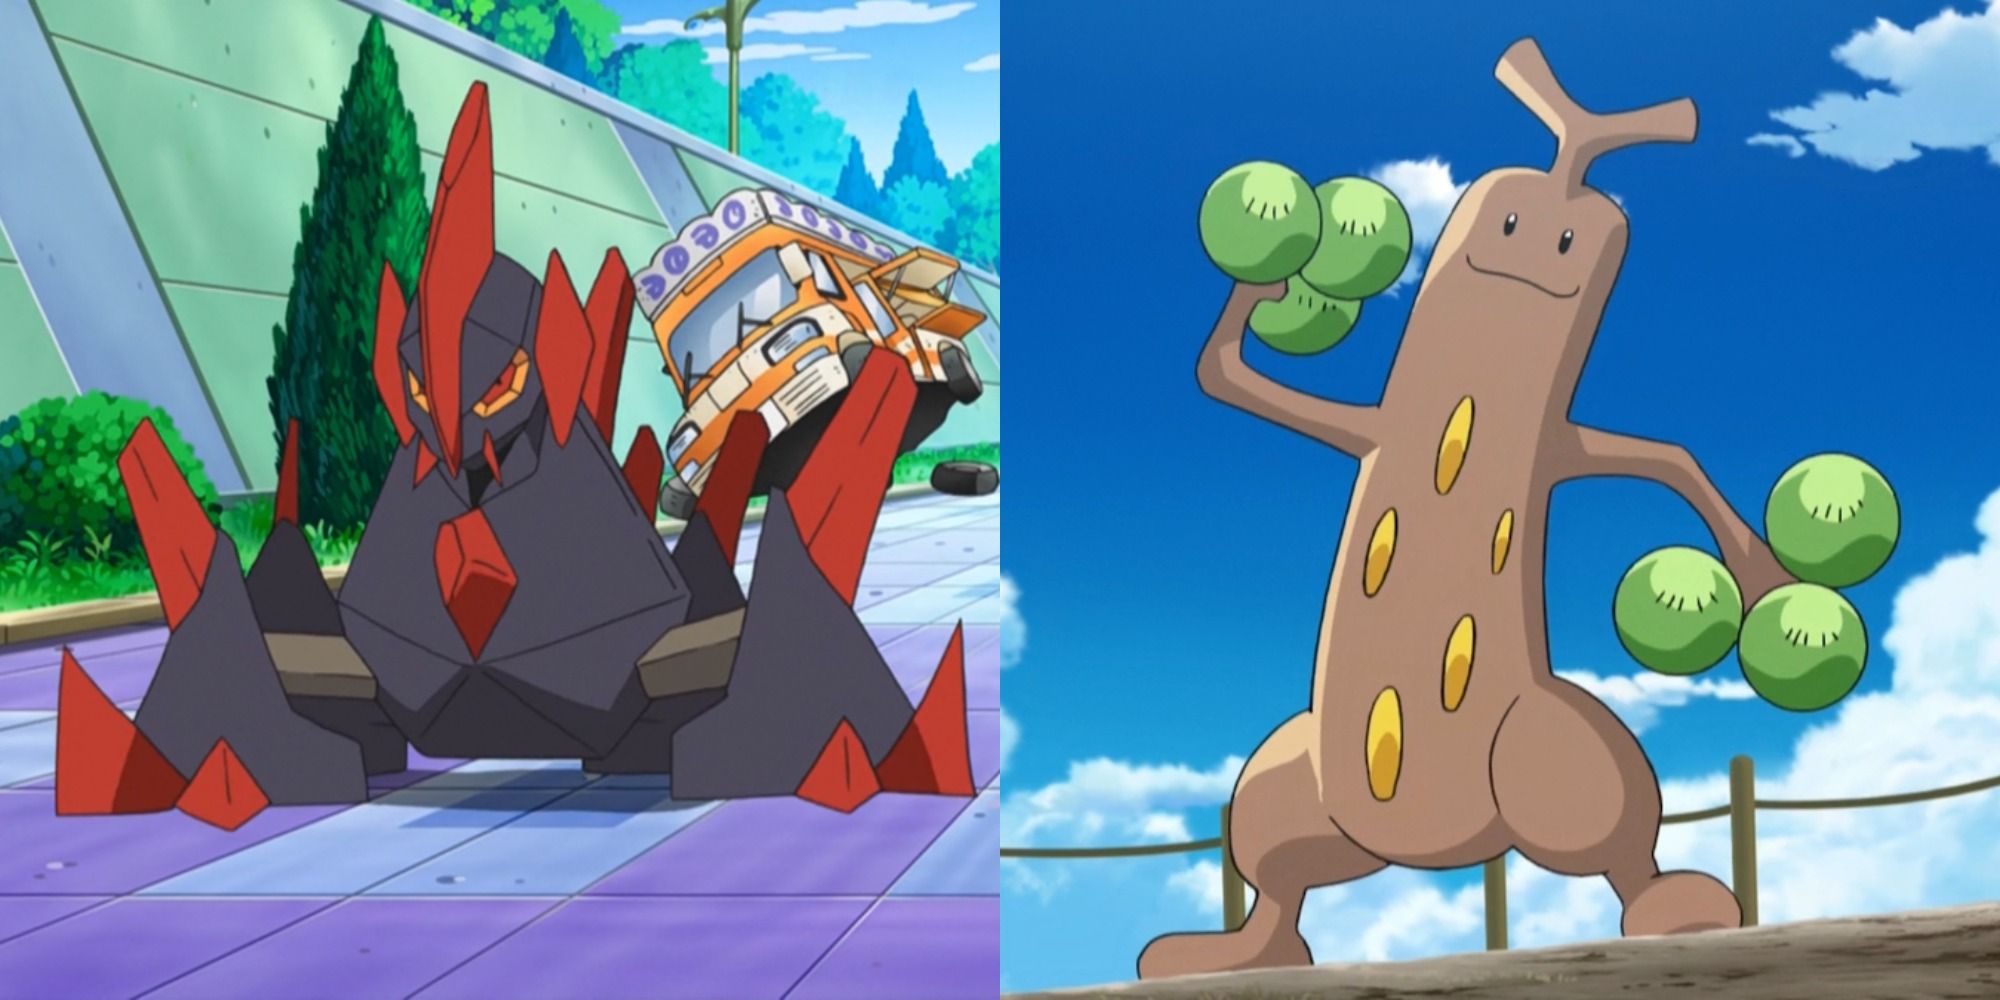 Split image of Gigalith and Sudowoodo dancing in a forest in the Pokemon anime.